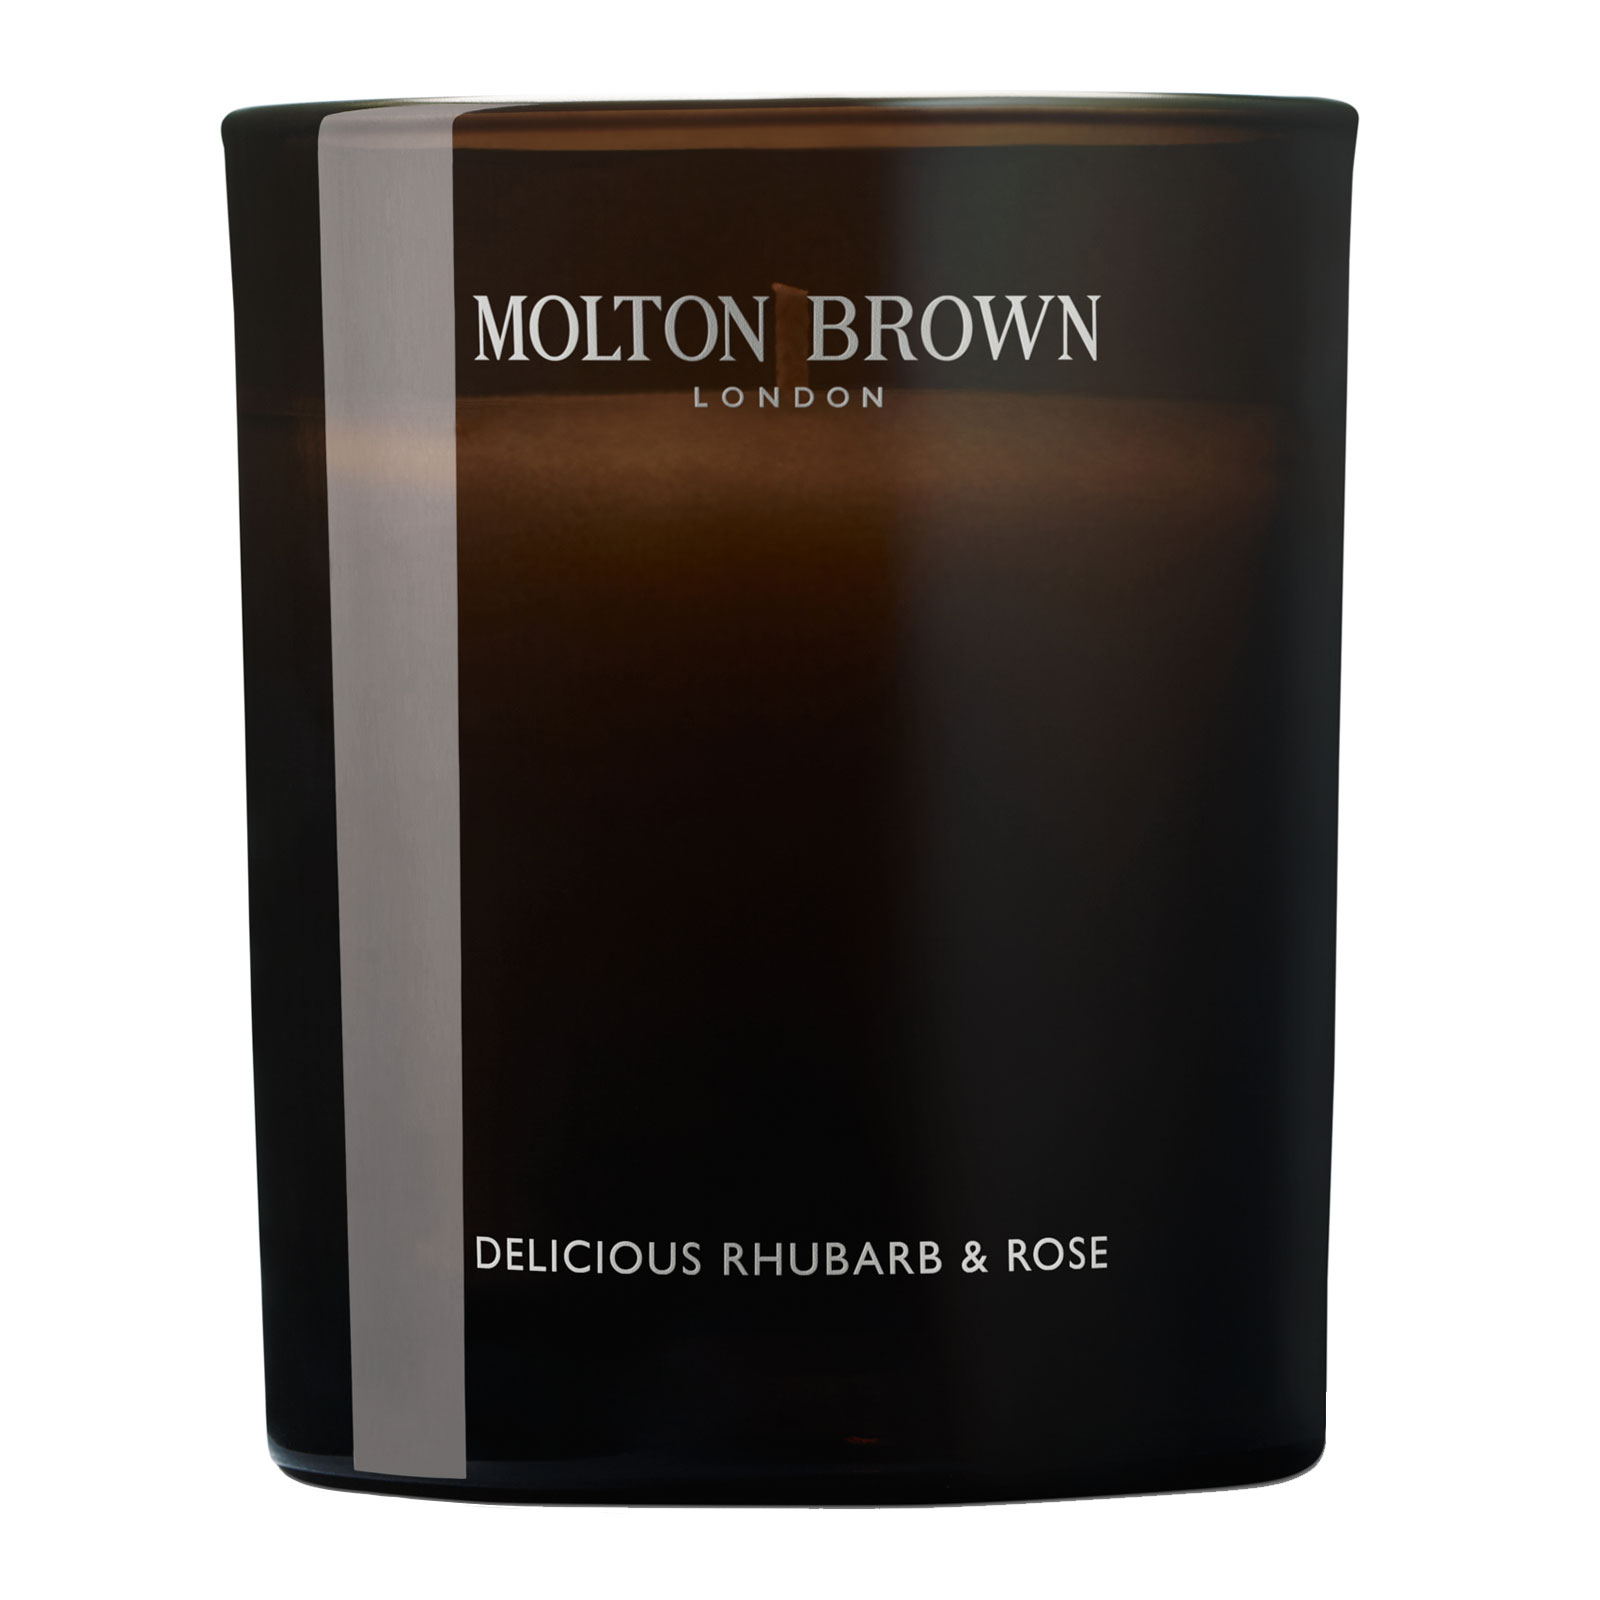 Molton Brown Delicious Rhubarb & Rose Signature Scented Single Wick Candle 190G